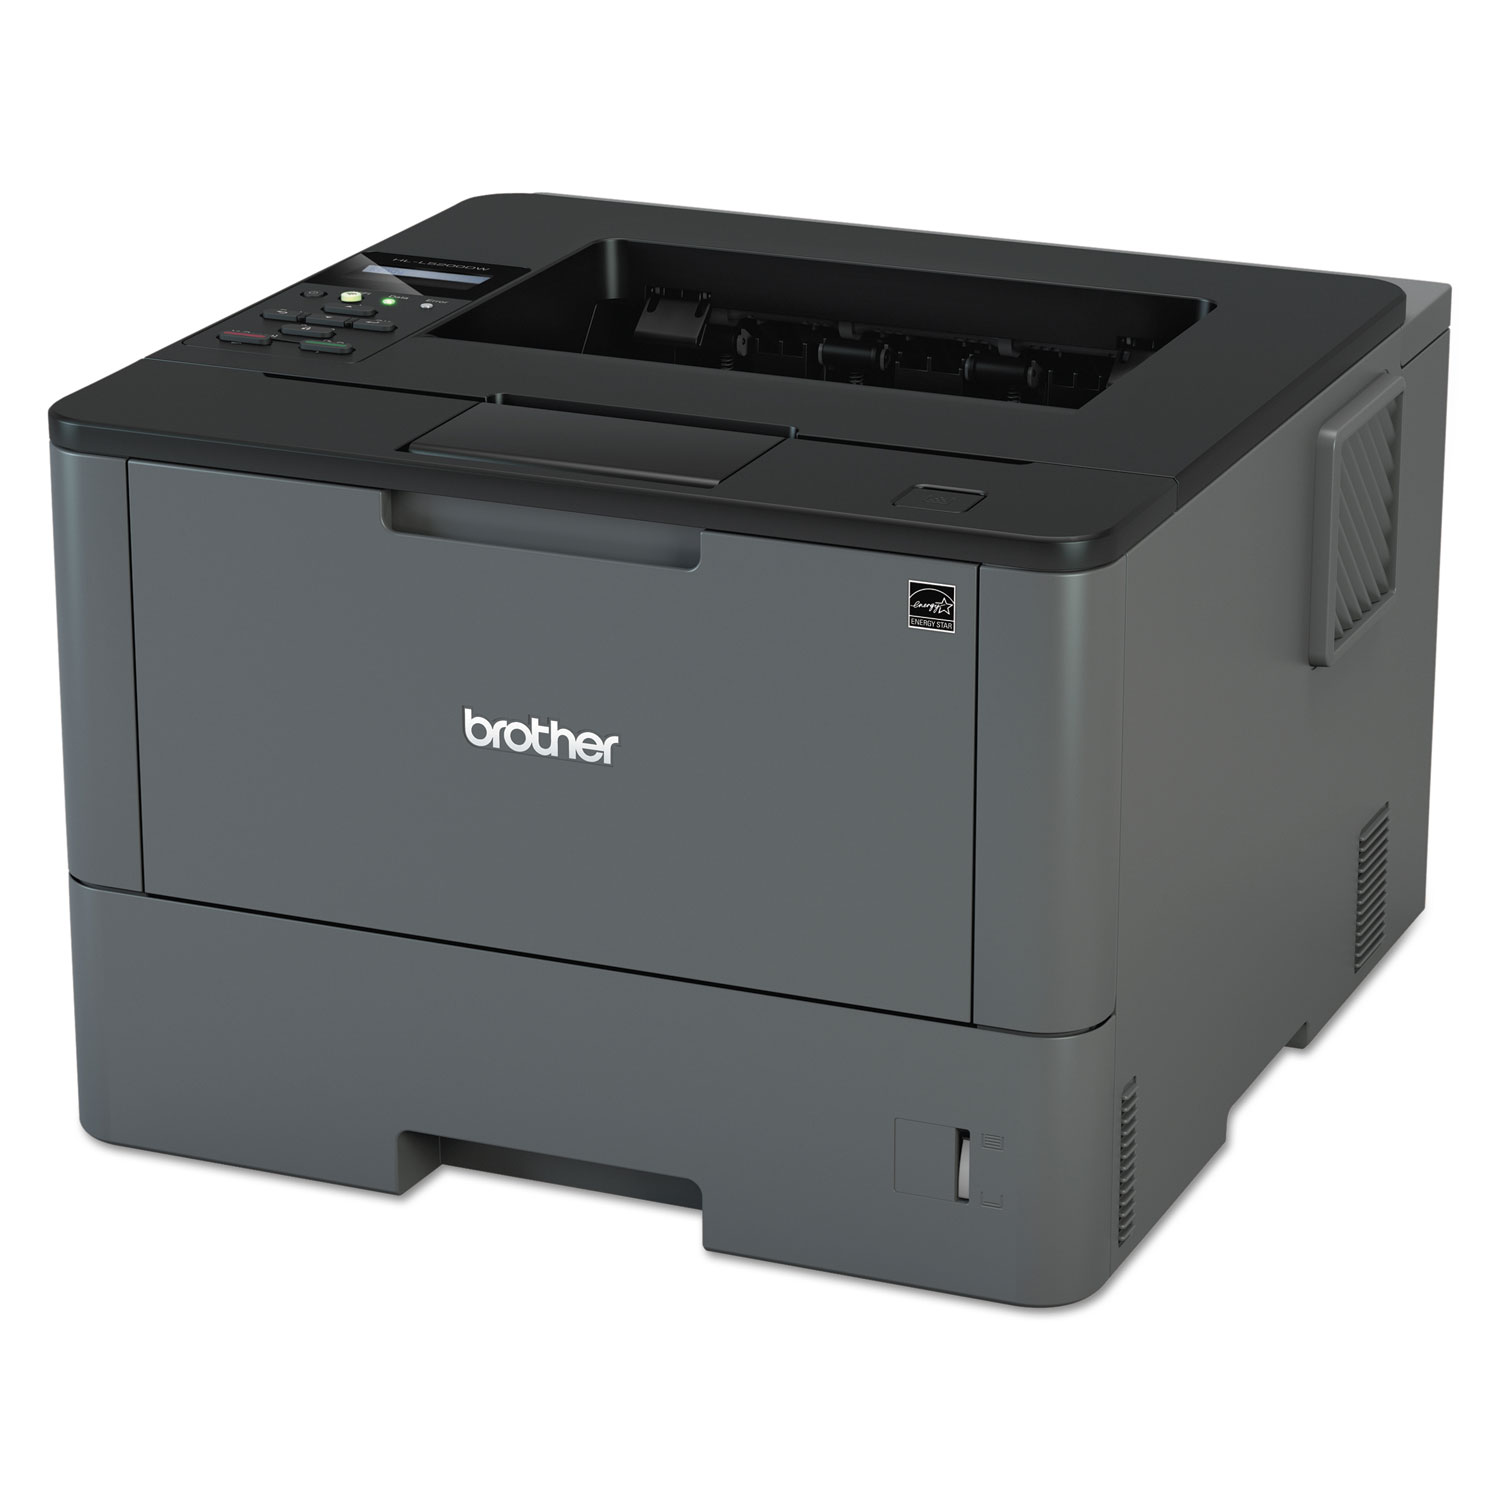 HL-L5200DW Business Laser Printer with Wireless Networking and Duplex Printing